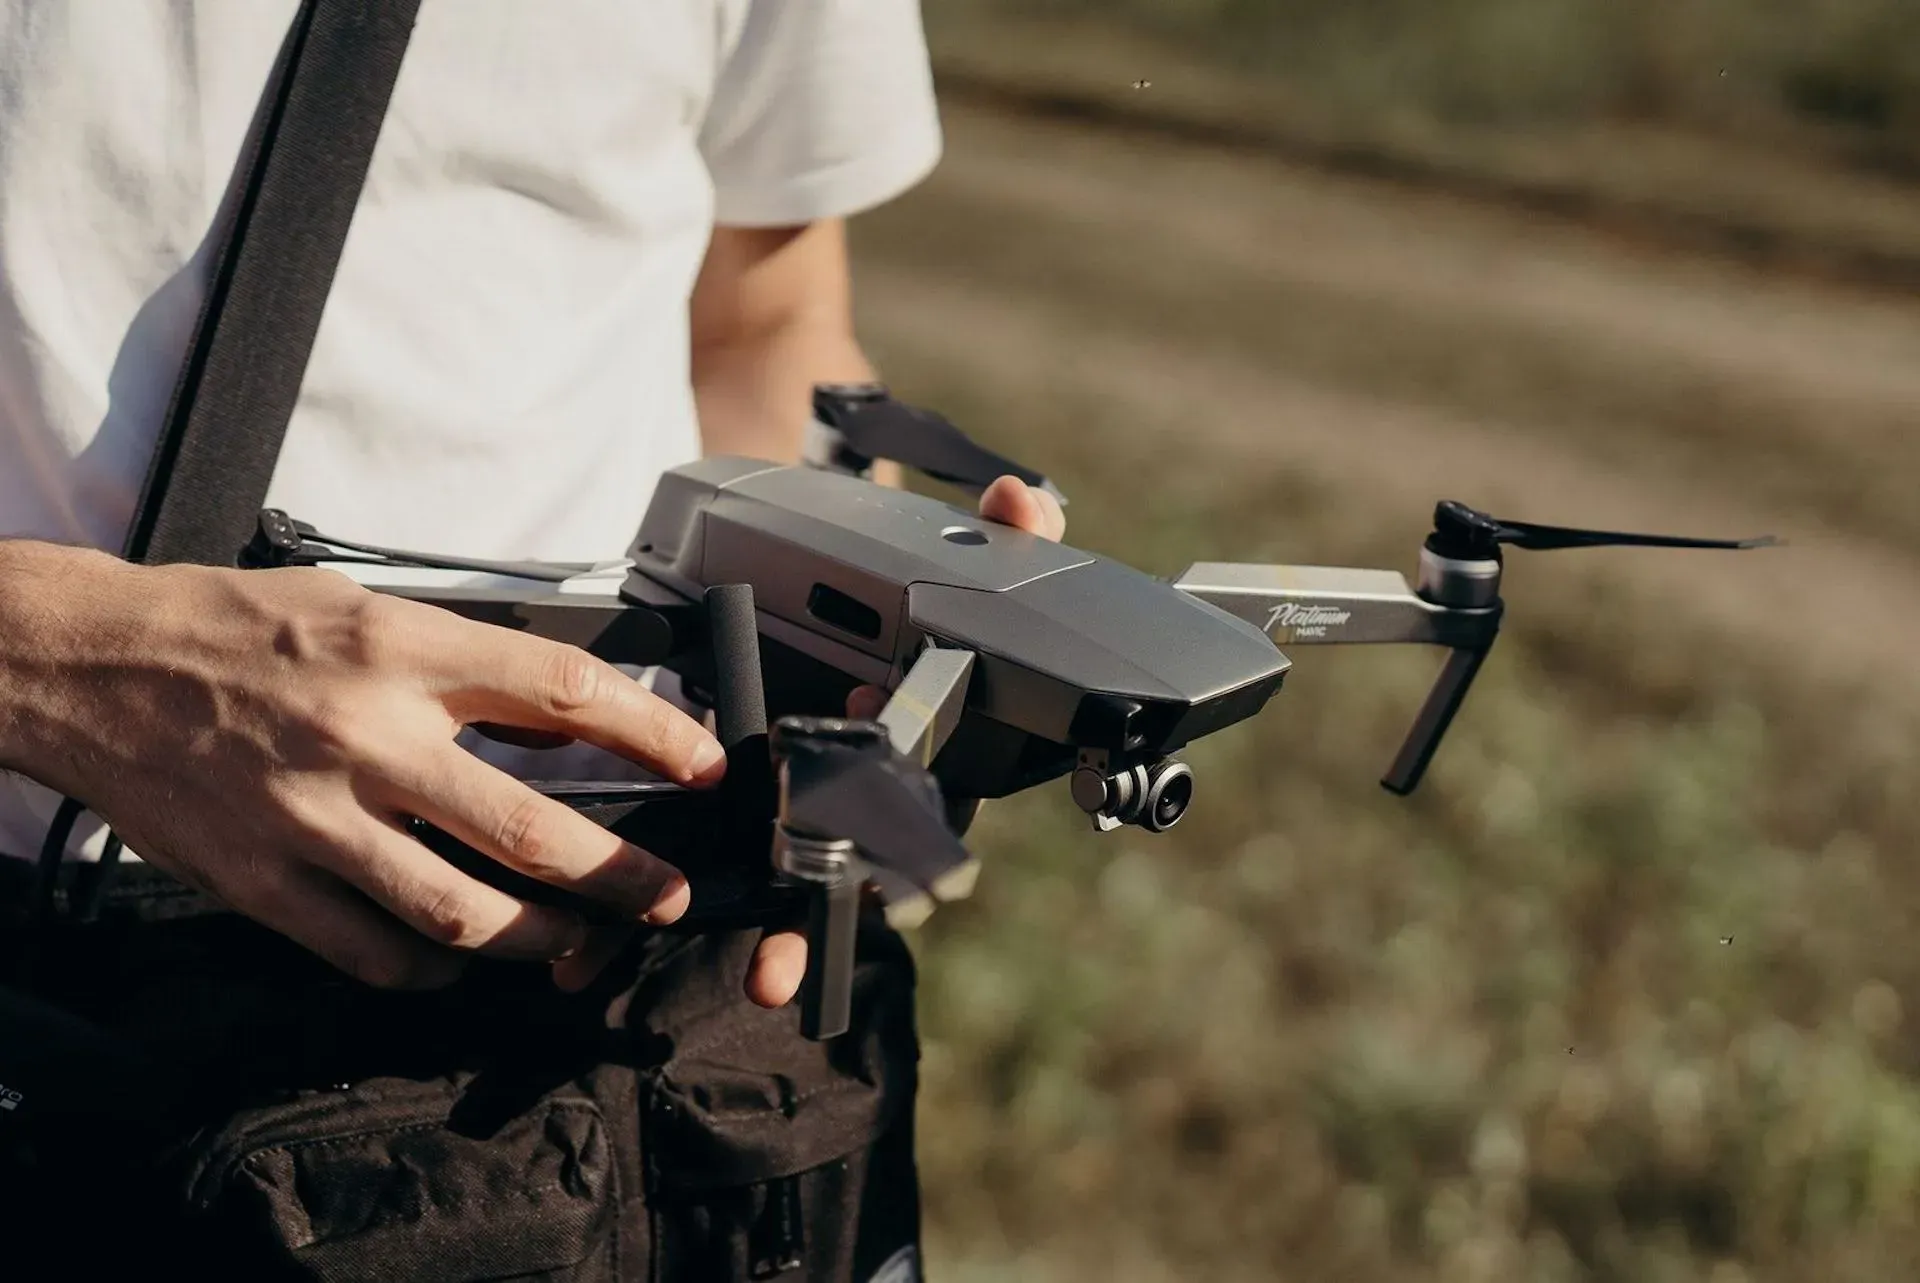 Preparing a drone to shoot footage